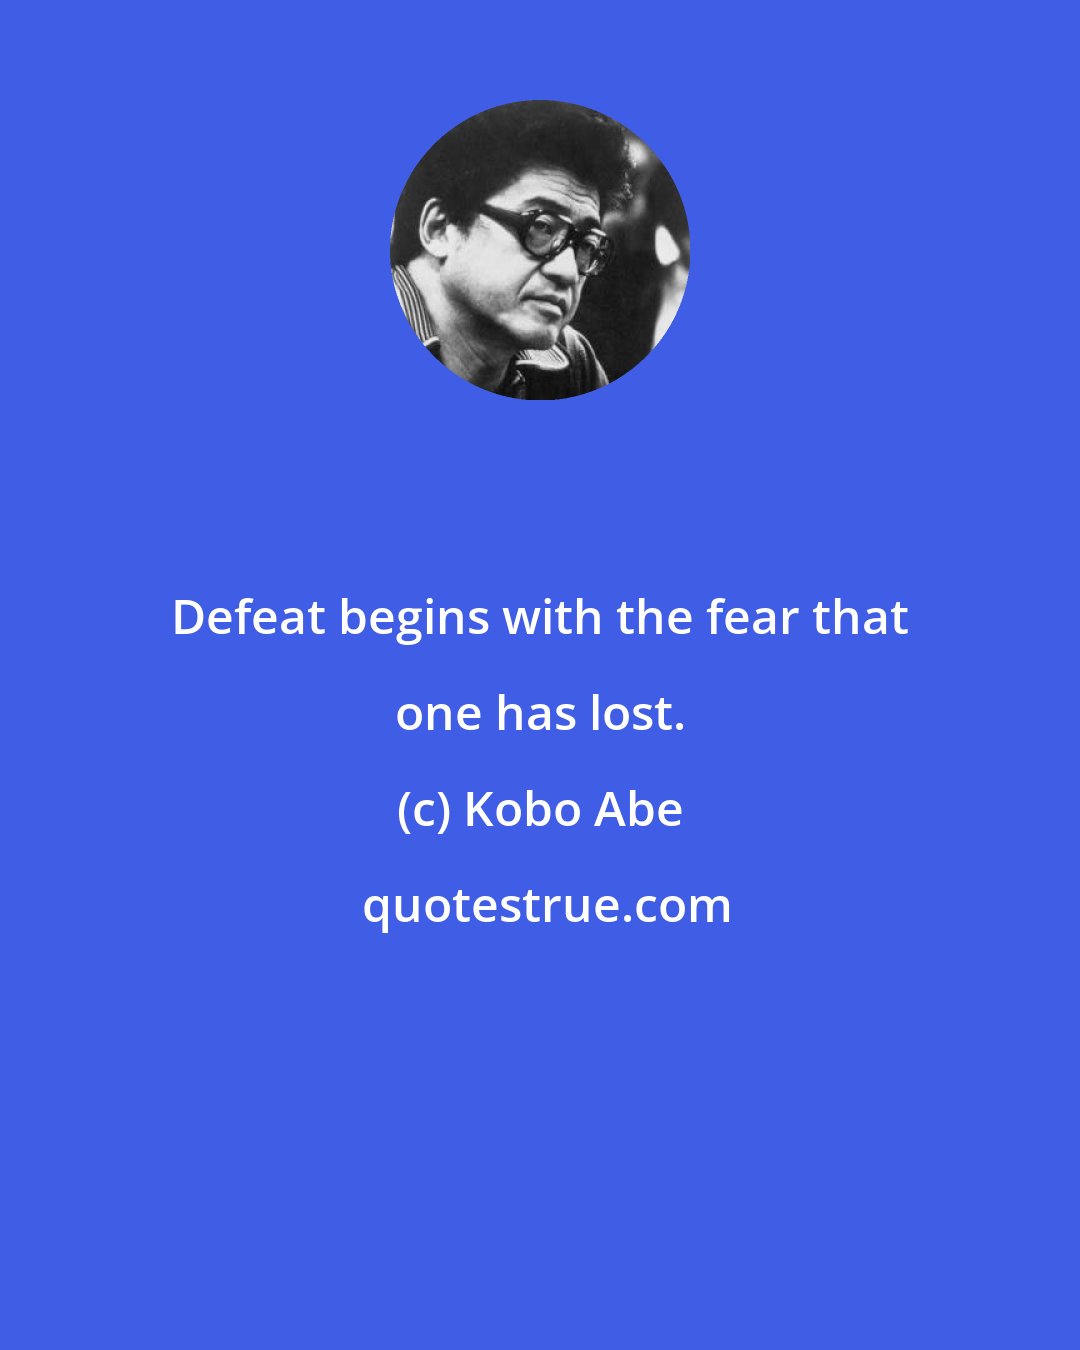 Kobo Abe: Defeat begins with the fear that one has lost.